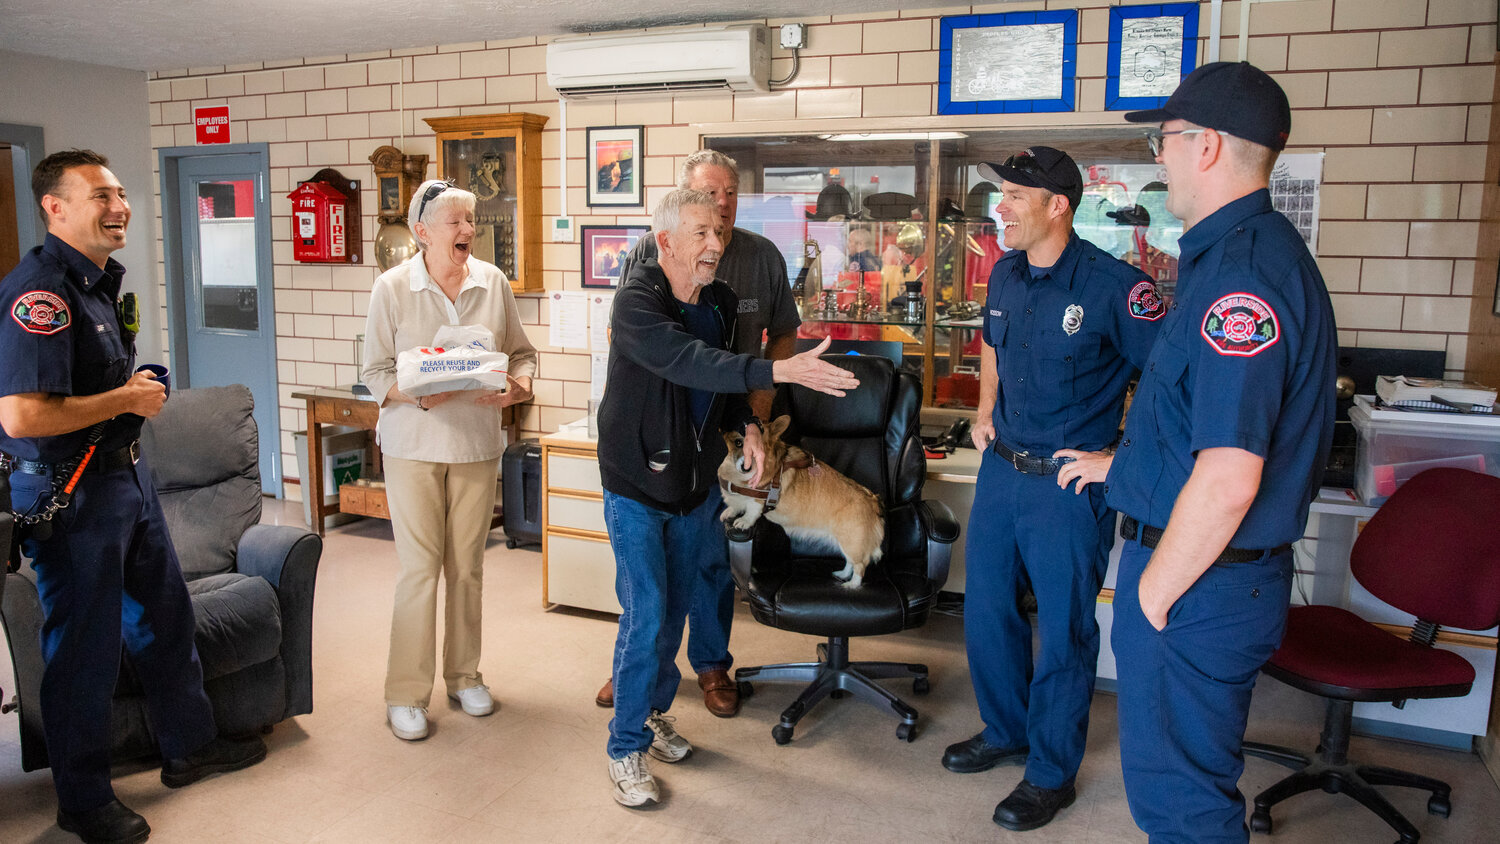 Scott Olson, 67, of Centralia, smiles while thanking Riverside firefighters for the work they do Wednesday morning. A defibrillator and a CPR machine were used to stabilize Olson’s heart last April. Riverside Fire Authority predicts that survivability has risen about 15% since the implementation of the CPR machine on their calls.